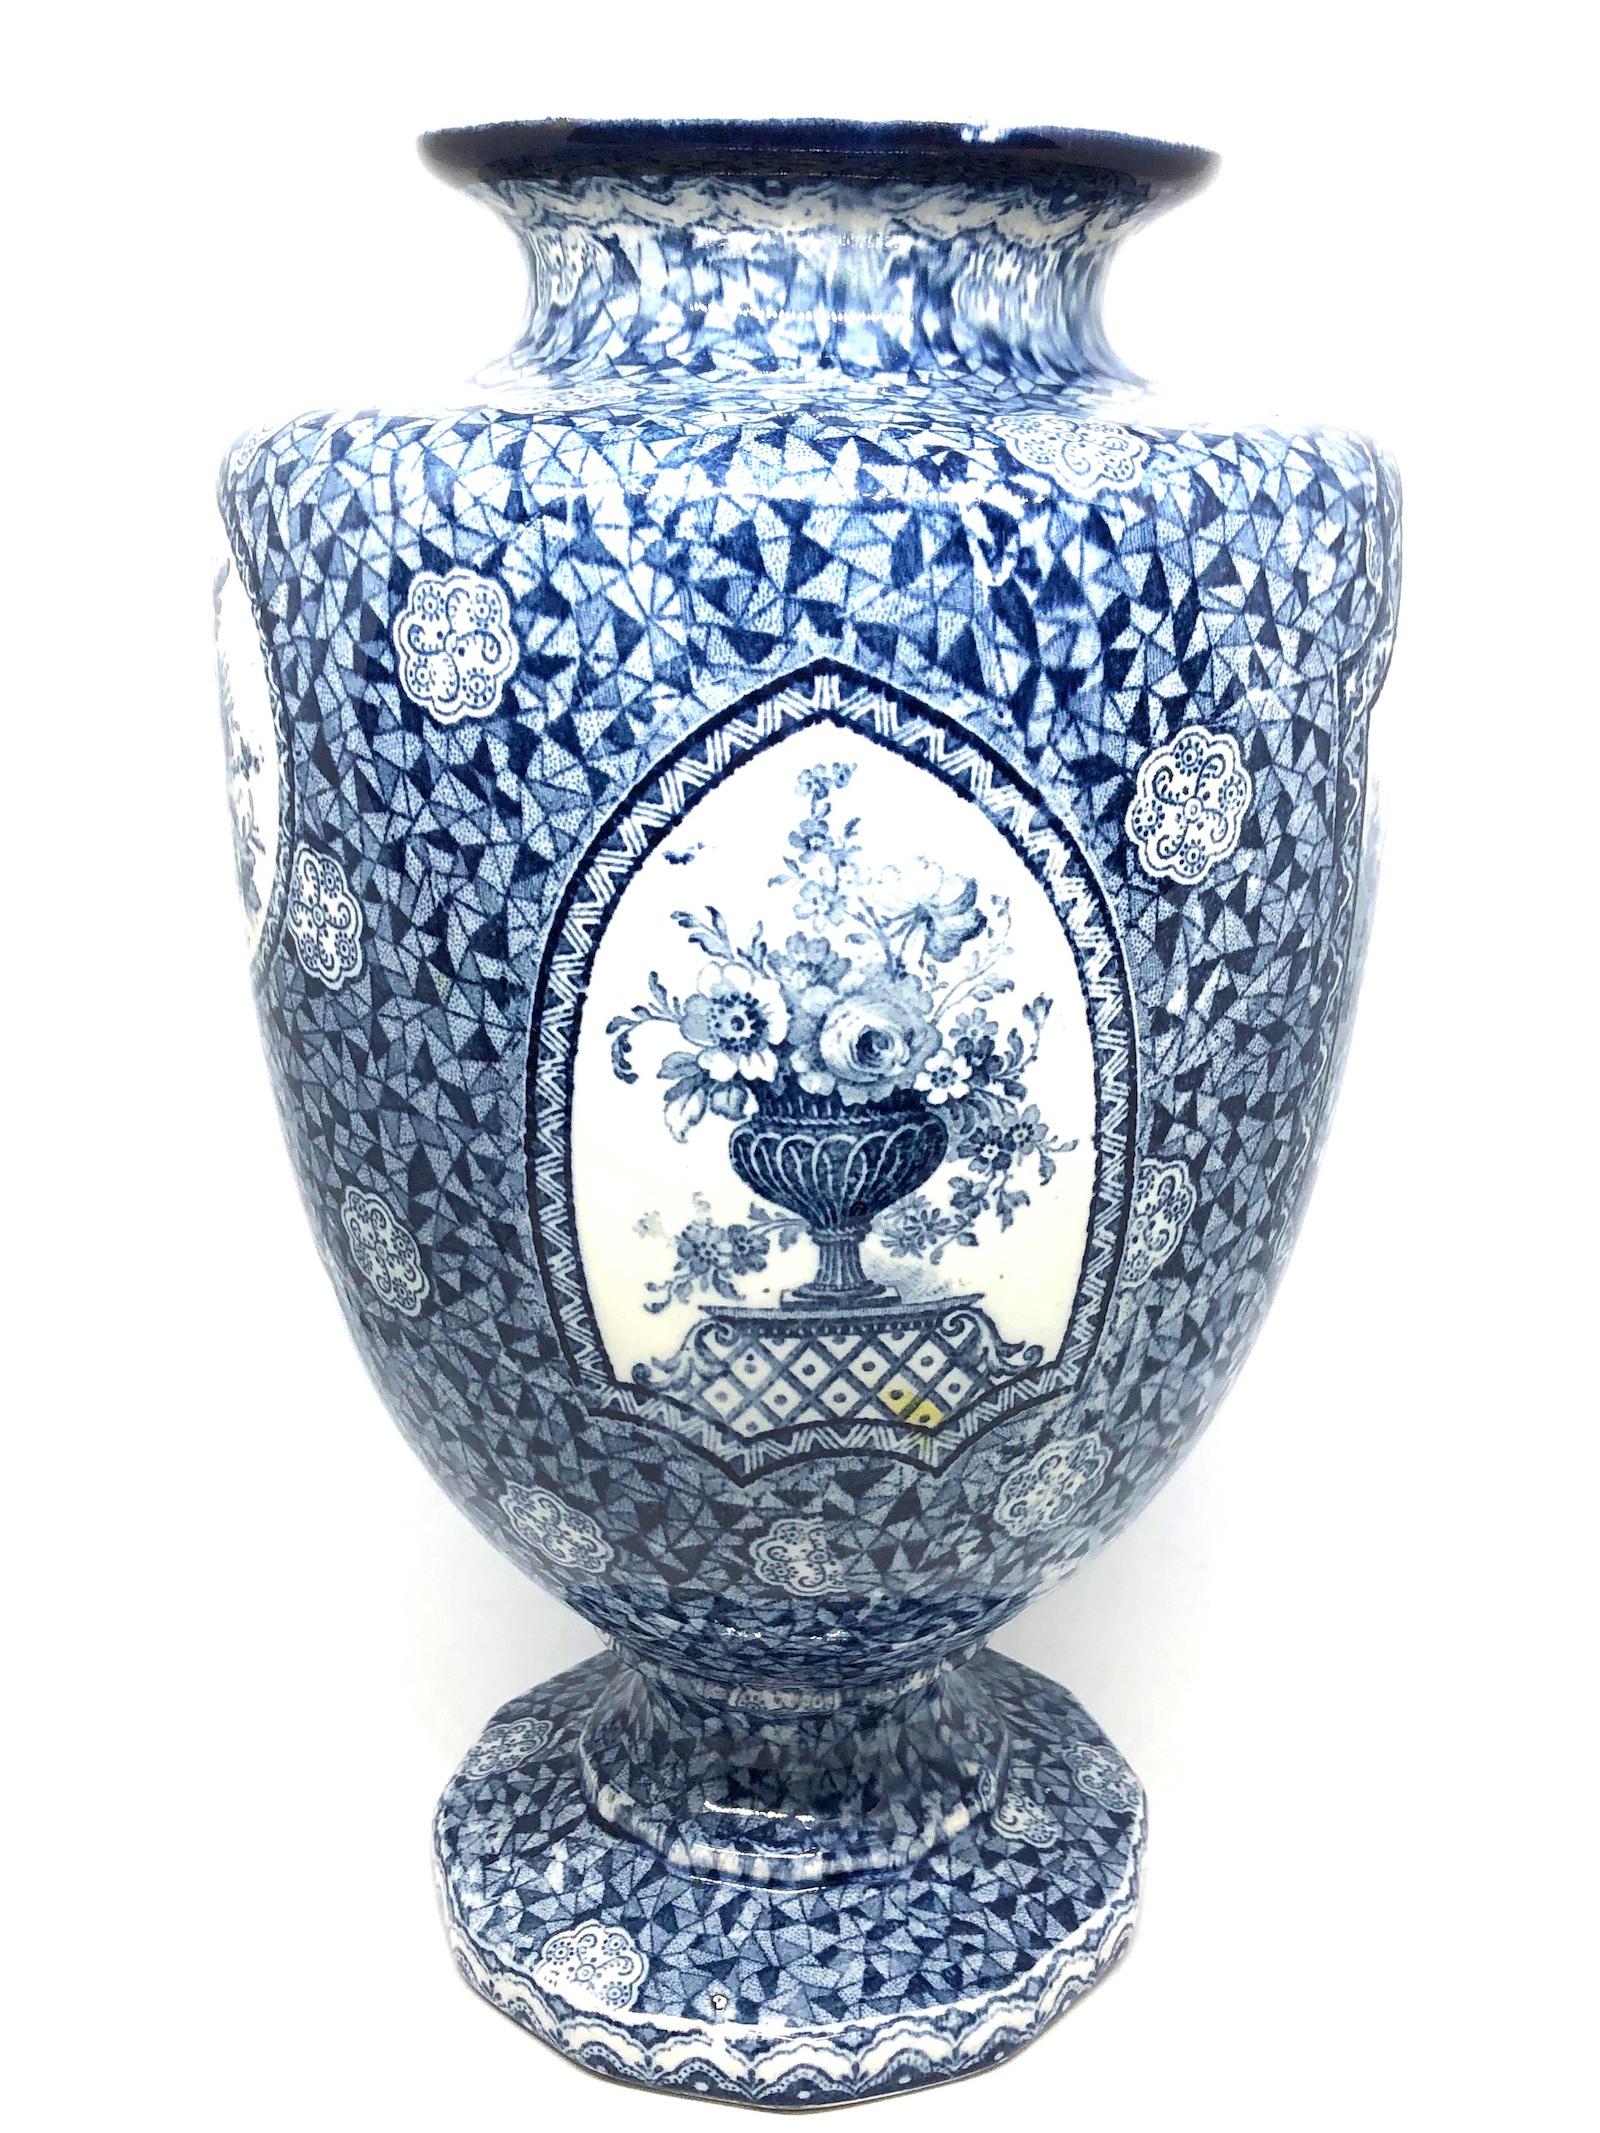 An amazing glazed transferware vase made in Germany, circa 1890s. This is a heavy vase but you can also use it as a sculpture. Vase is in very good condition with no chips, cracks, or flea bites. Unidentifiable 